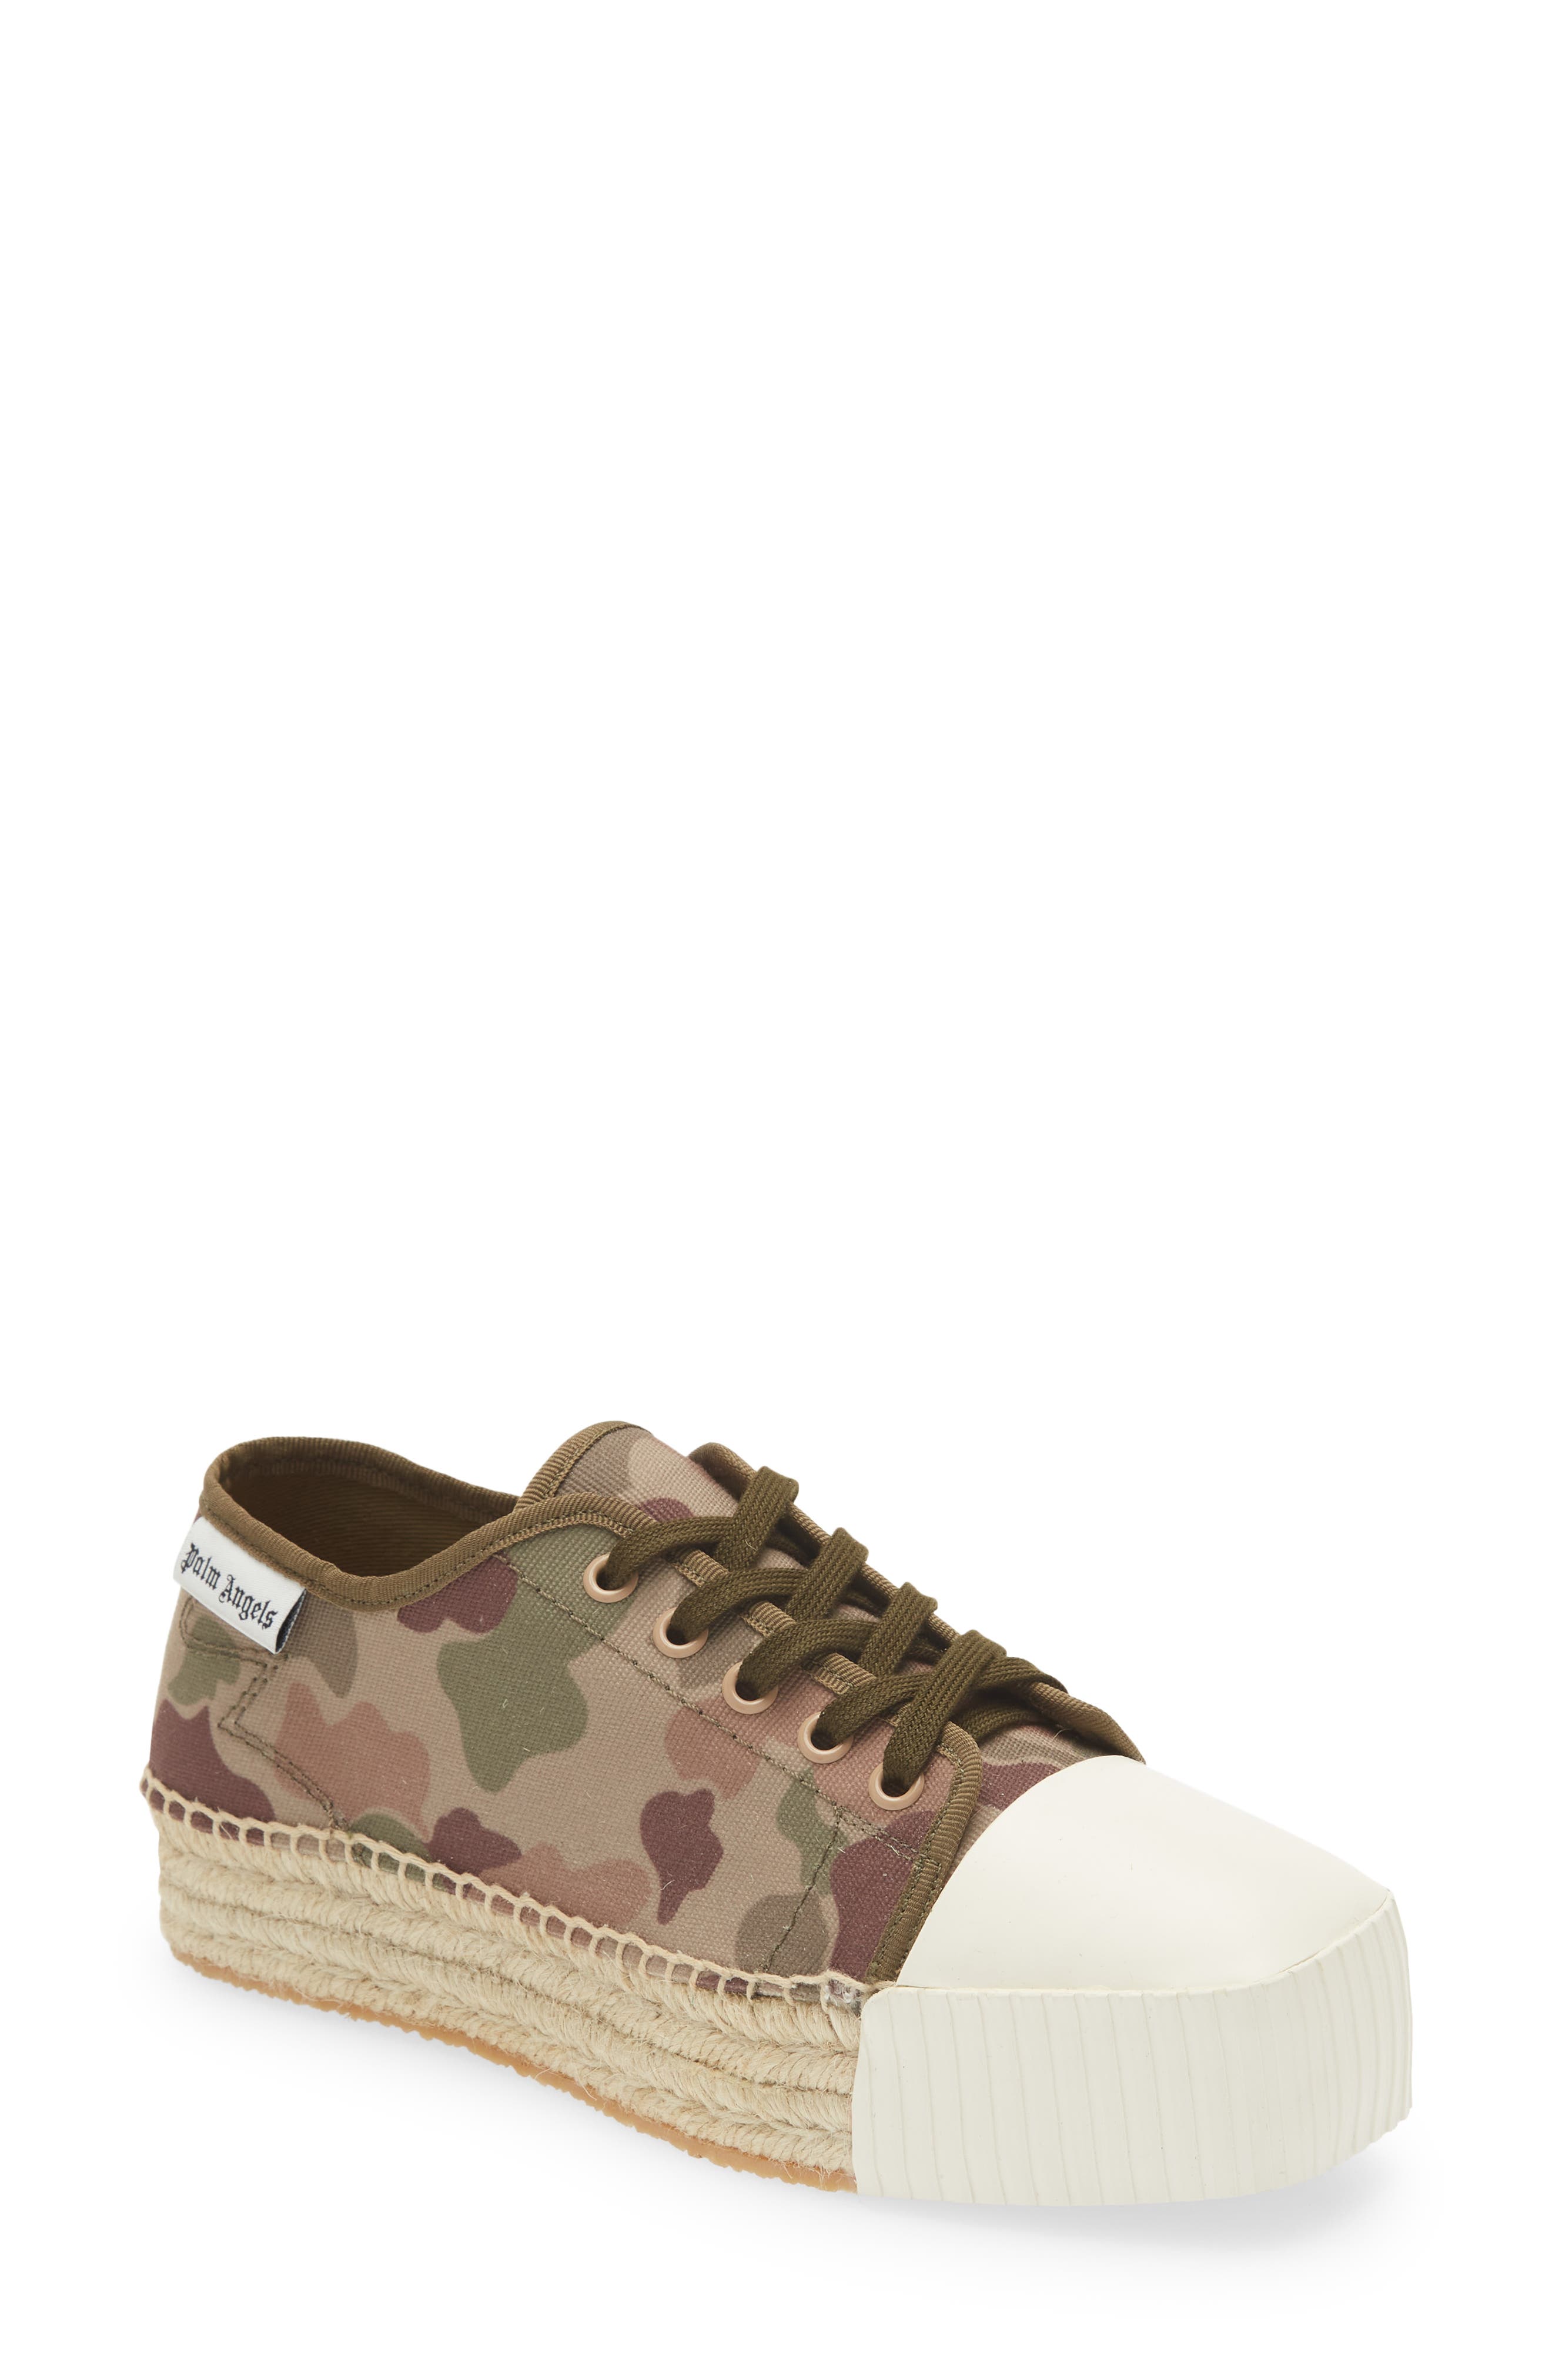 Palm Angels Camo Espadrille Platform Sneaker in Military